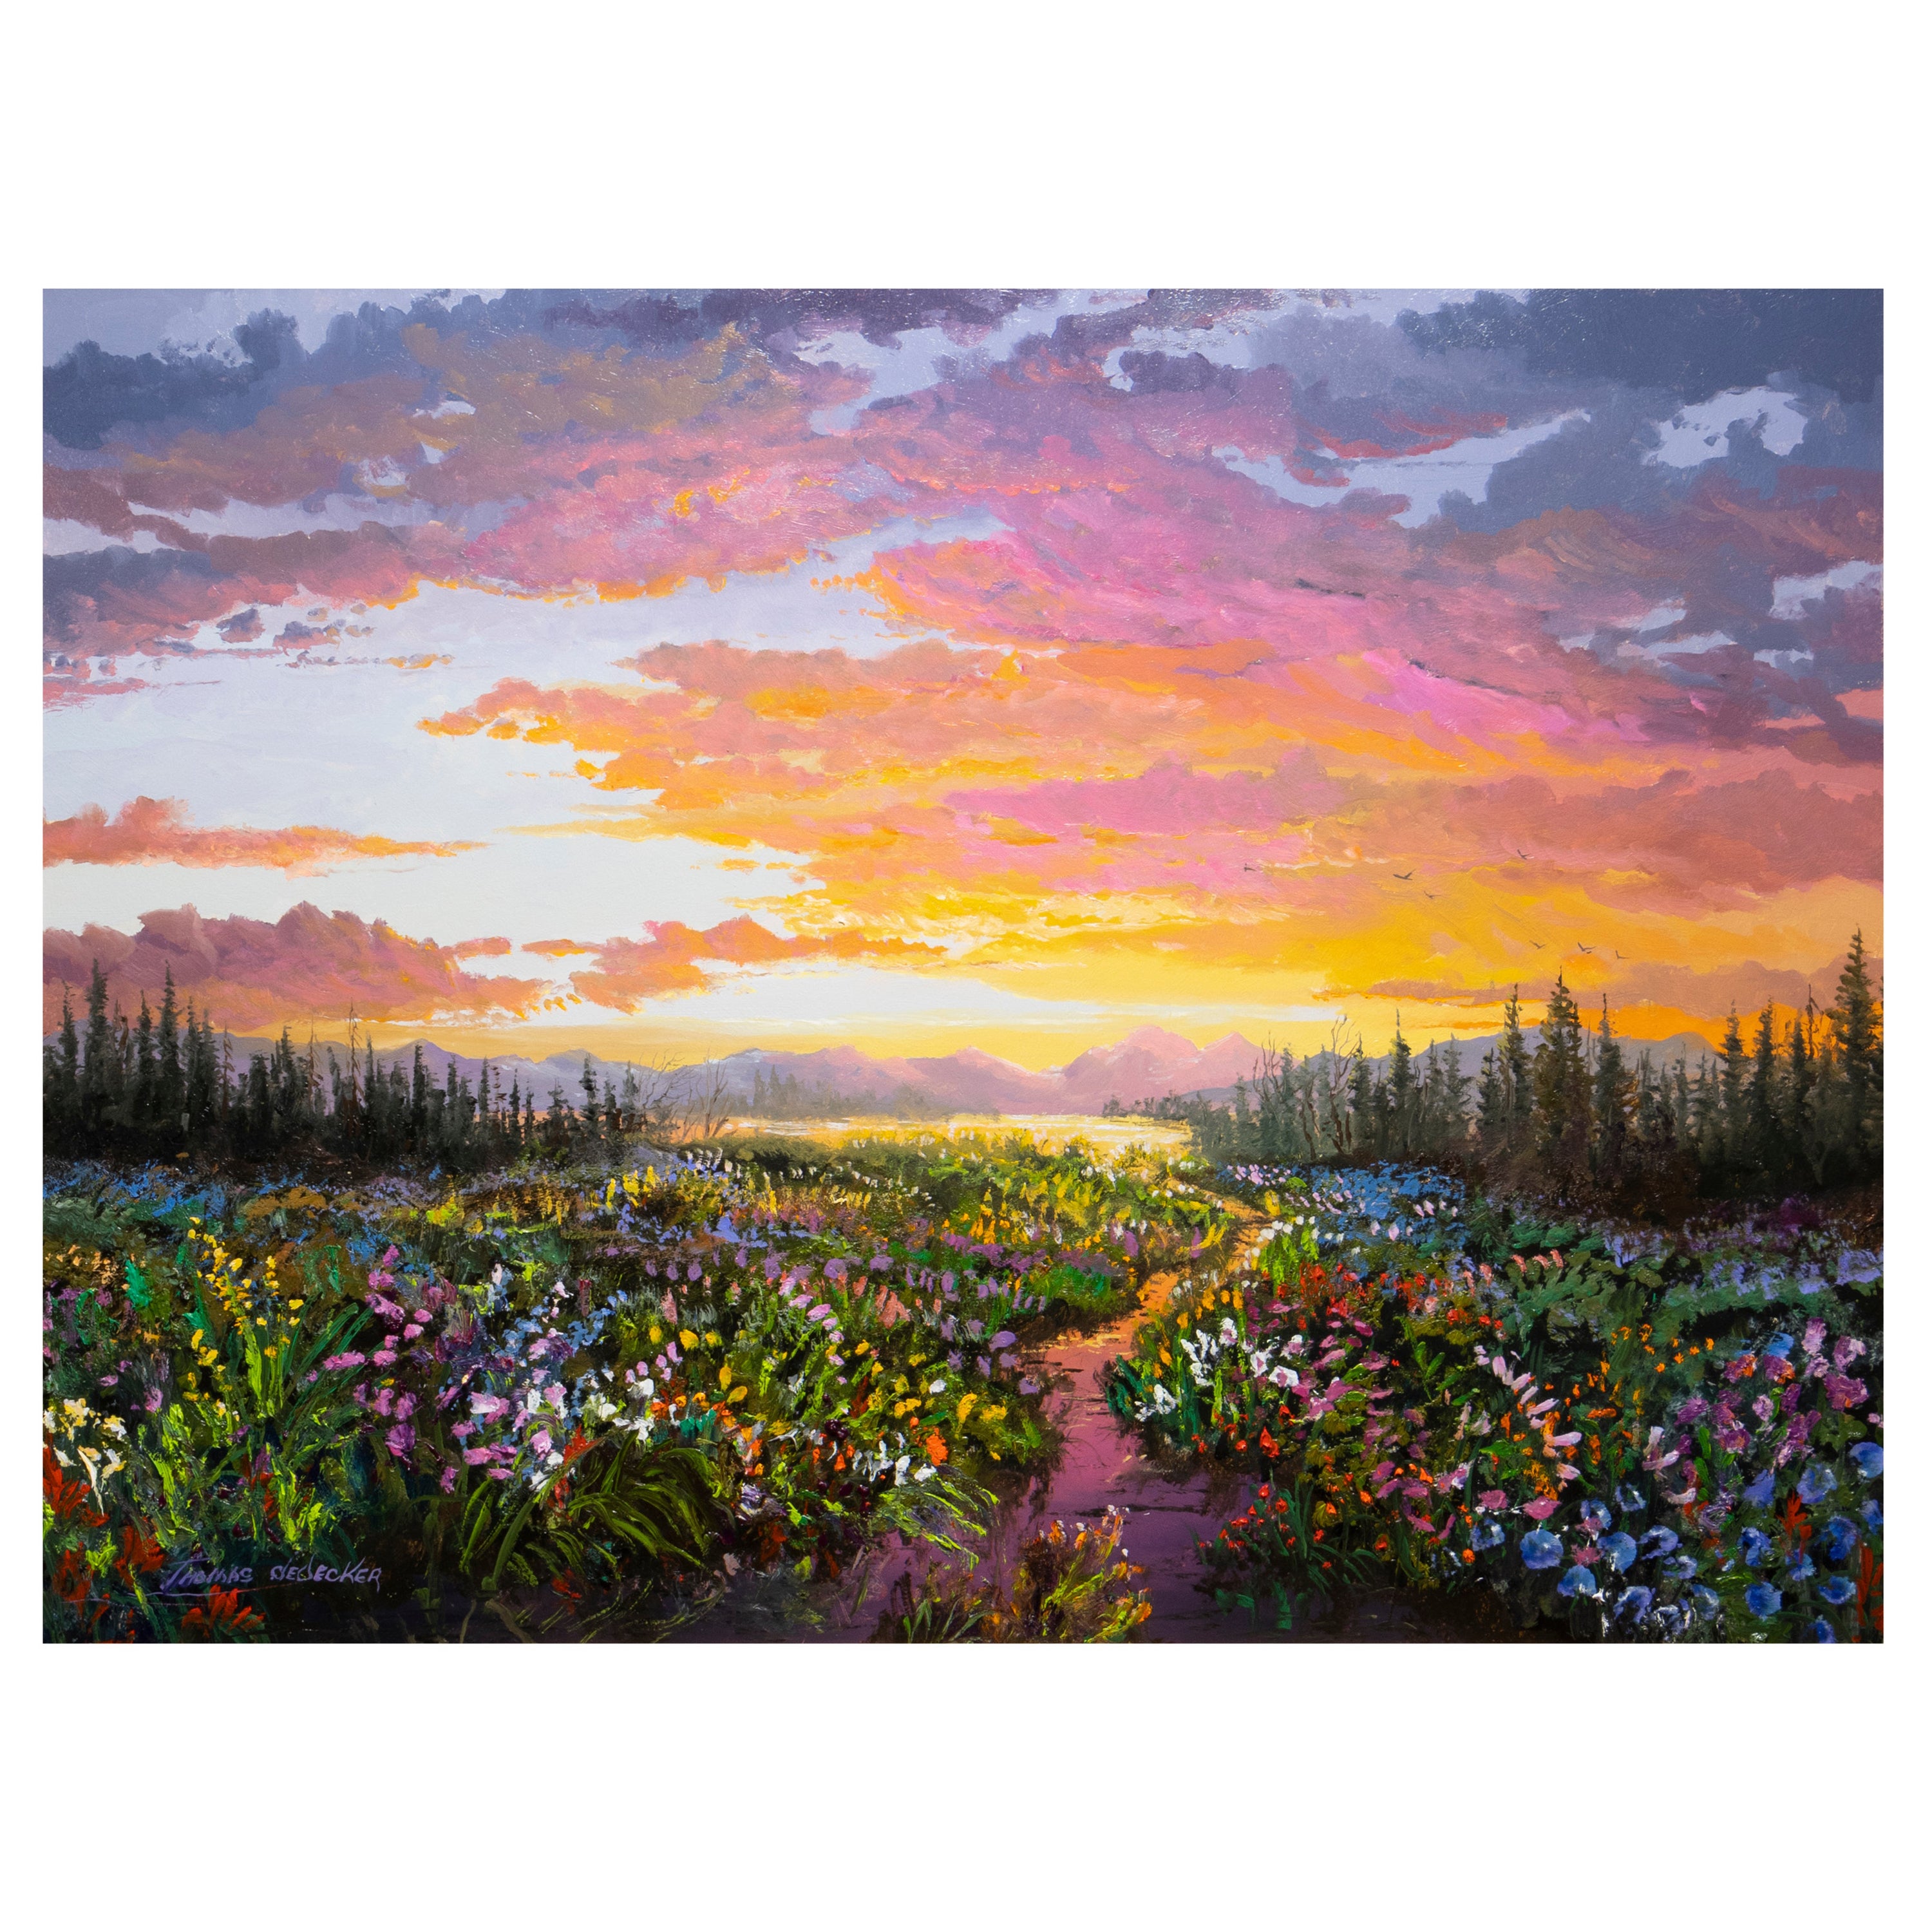 Original Painting "Western Sunset" by Thomas DeDecker For Sale